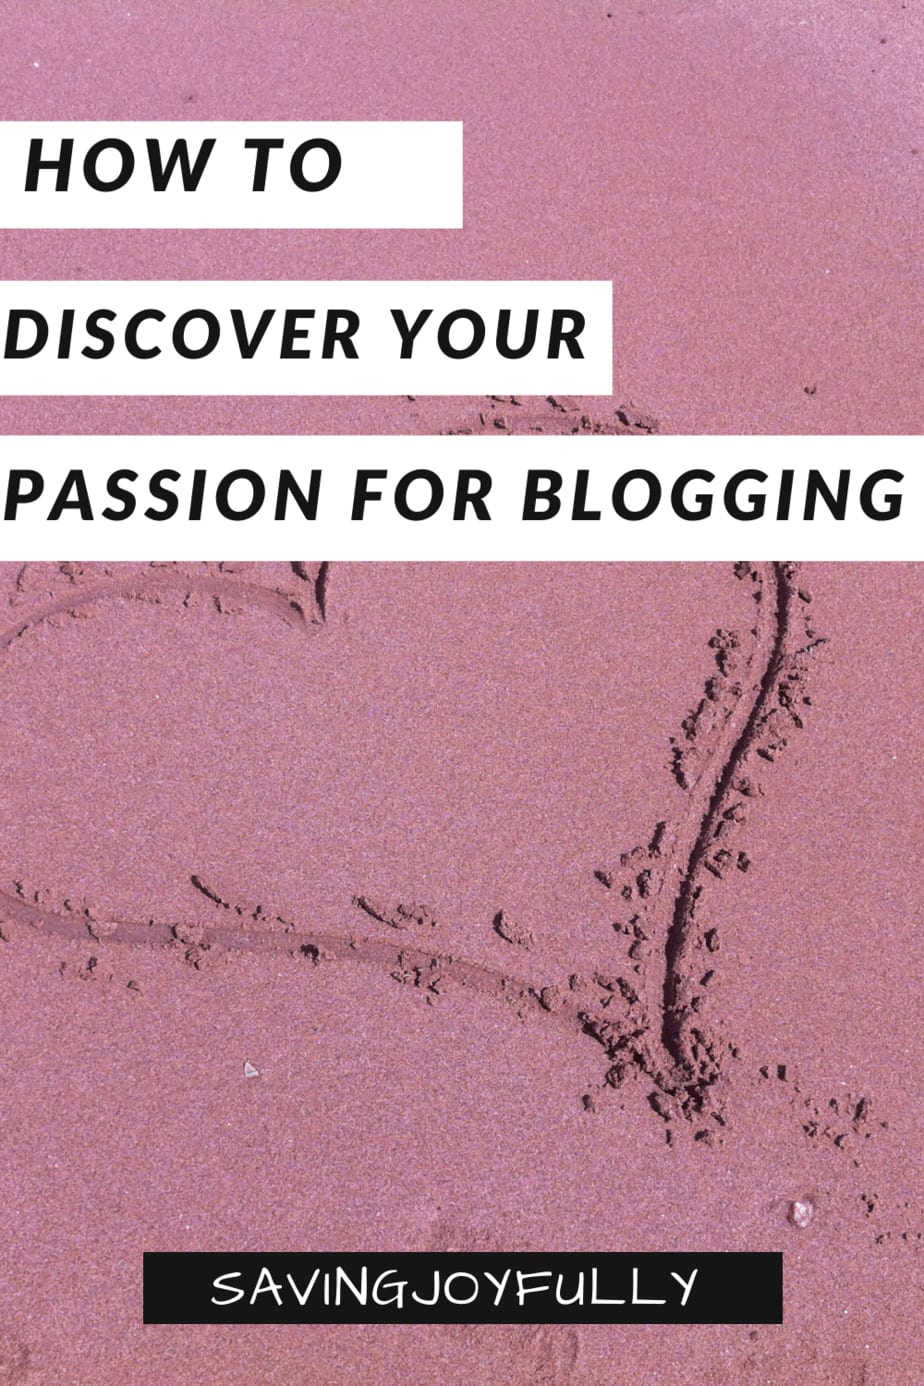 HAVE I LOST MY PASSION FOR BLOGGING?